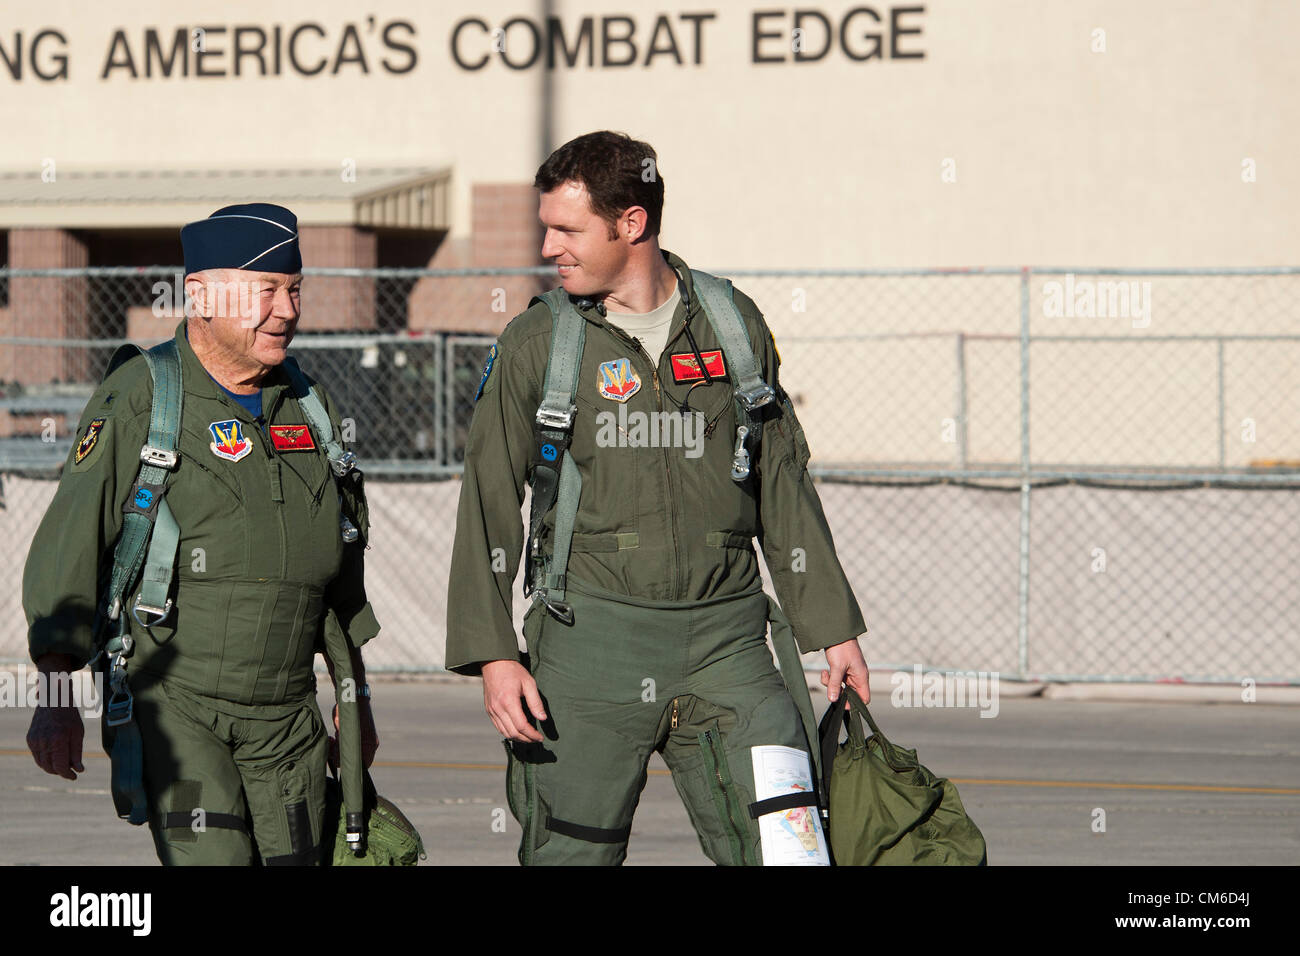 Retired United States Air Force Brig. Gen. Chuck Yeager, 89, and Air Force pilot Capt. David Vincent walk to their F-15D Eagle fighter aircraft to celebrate the 65th anniversary of becoming the first person to break the sound barrier October 14, 2012, at Nellis Air Force Base, Nevada. In 1947 Yeager broke the sound barrier in a Bell XS-1 rocket research plane named Glamorous Glennis. Stock Photo